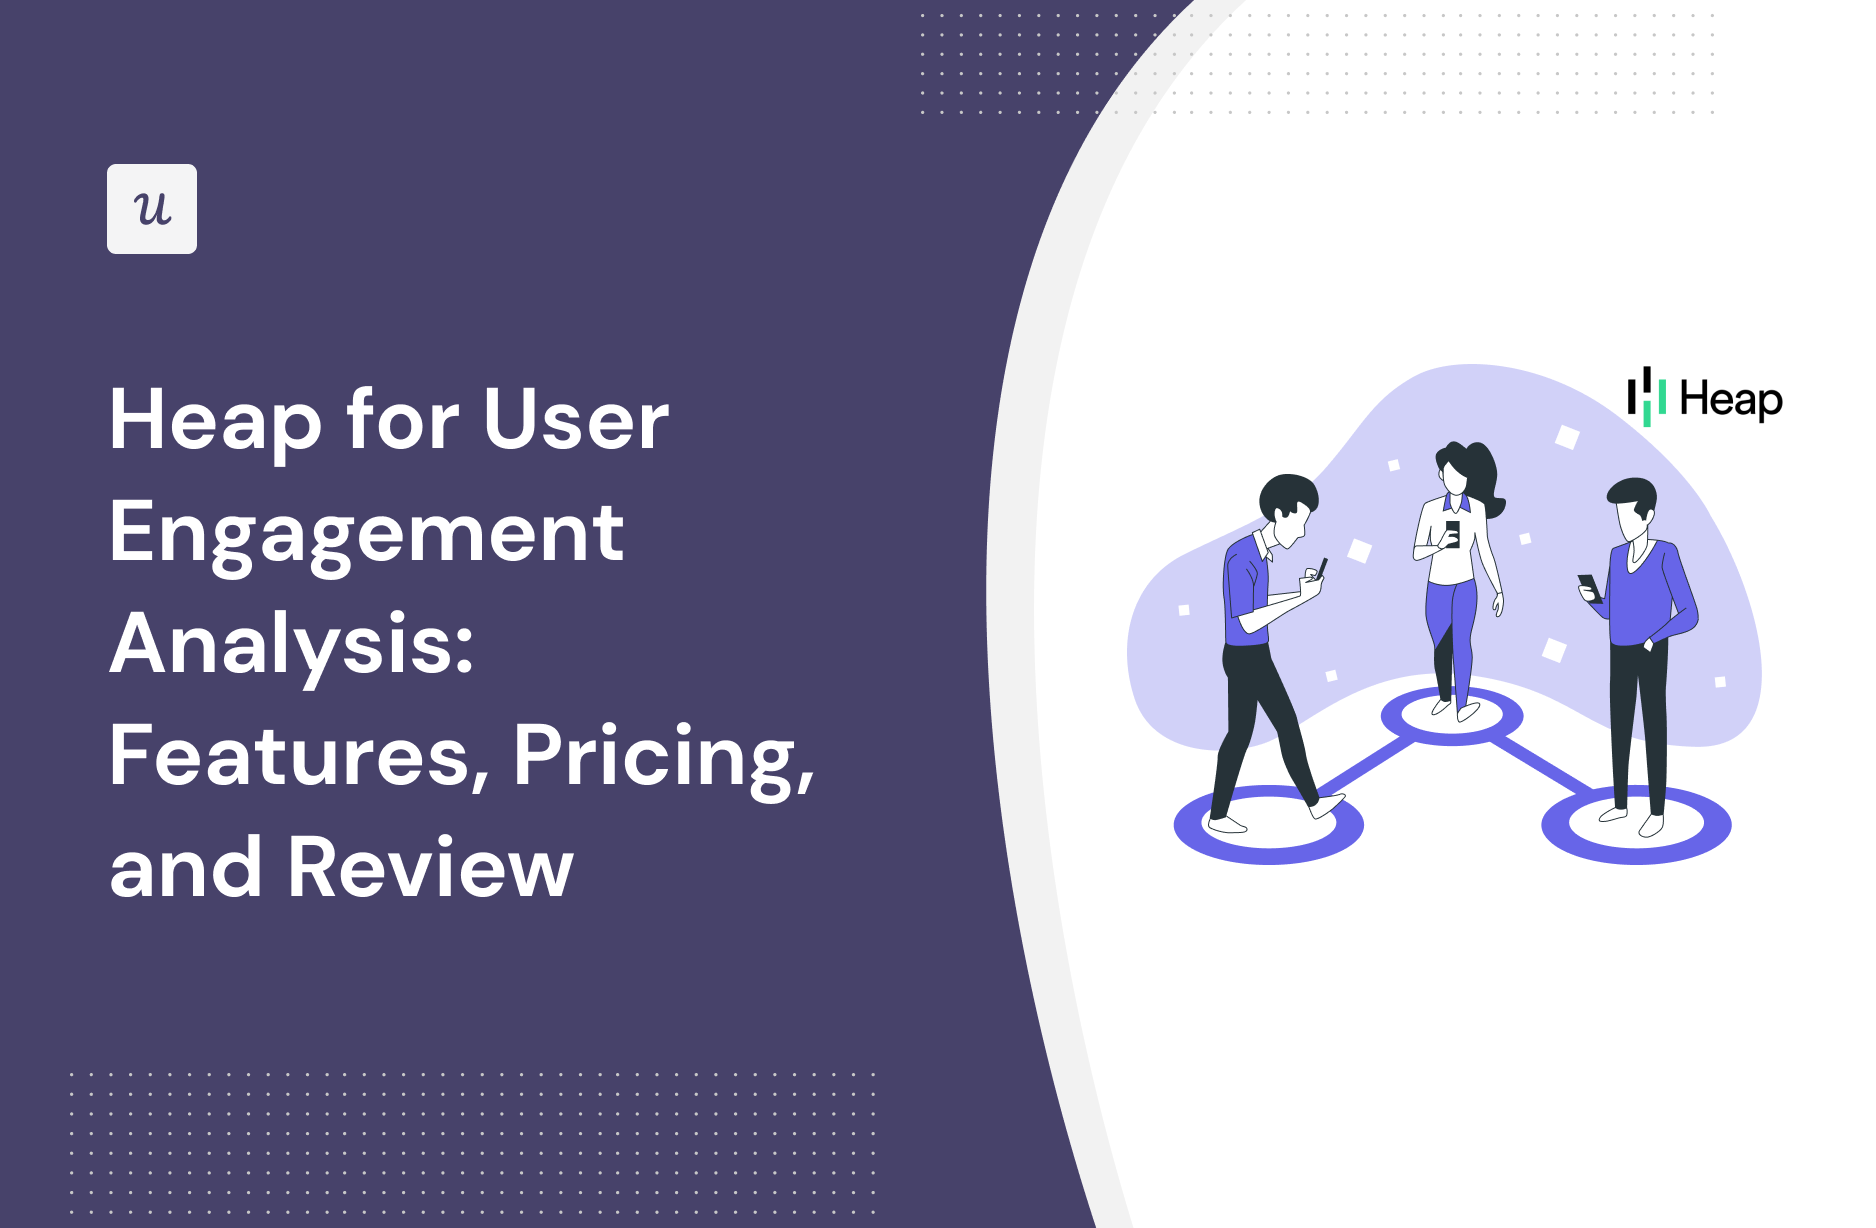 Heap for User Engagement Analysis: Features, Pricing, and Review